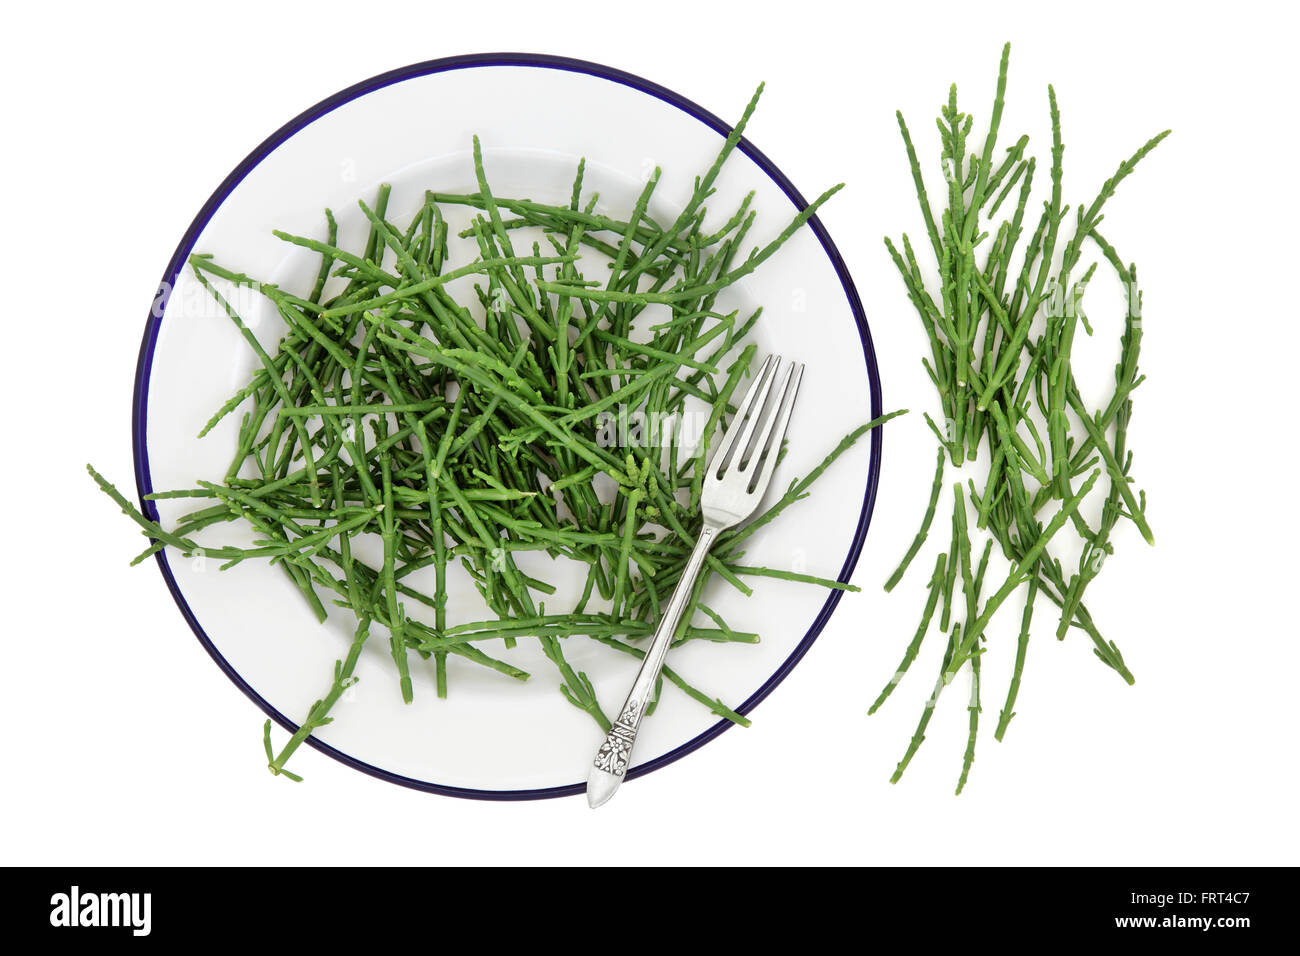 Rock samphire vegetable health food on a plate with silver fork and loose over white background. Salicornia  europaea. Stock Photo